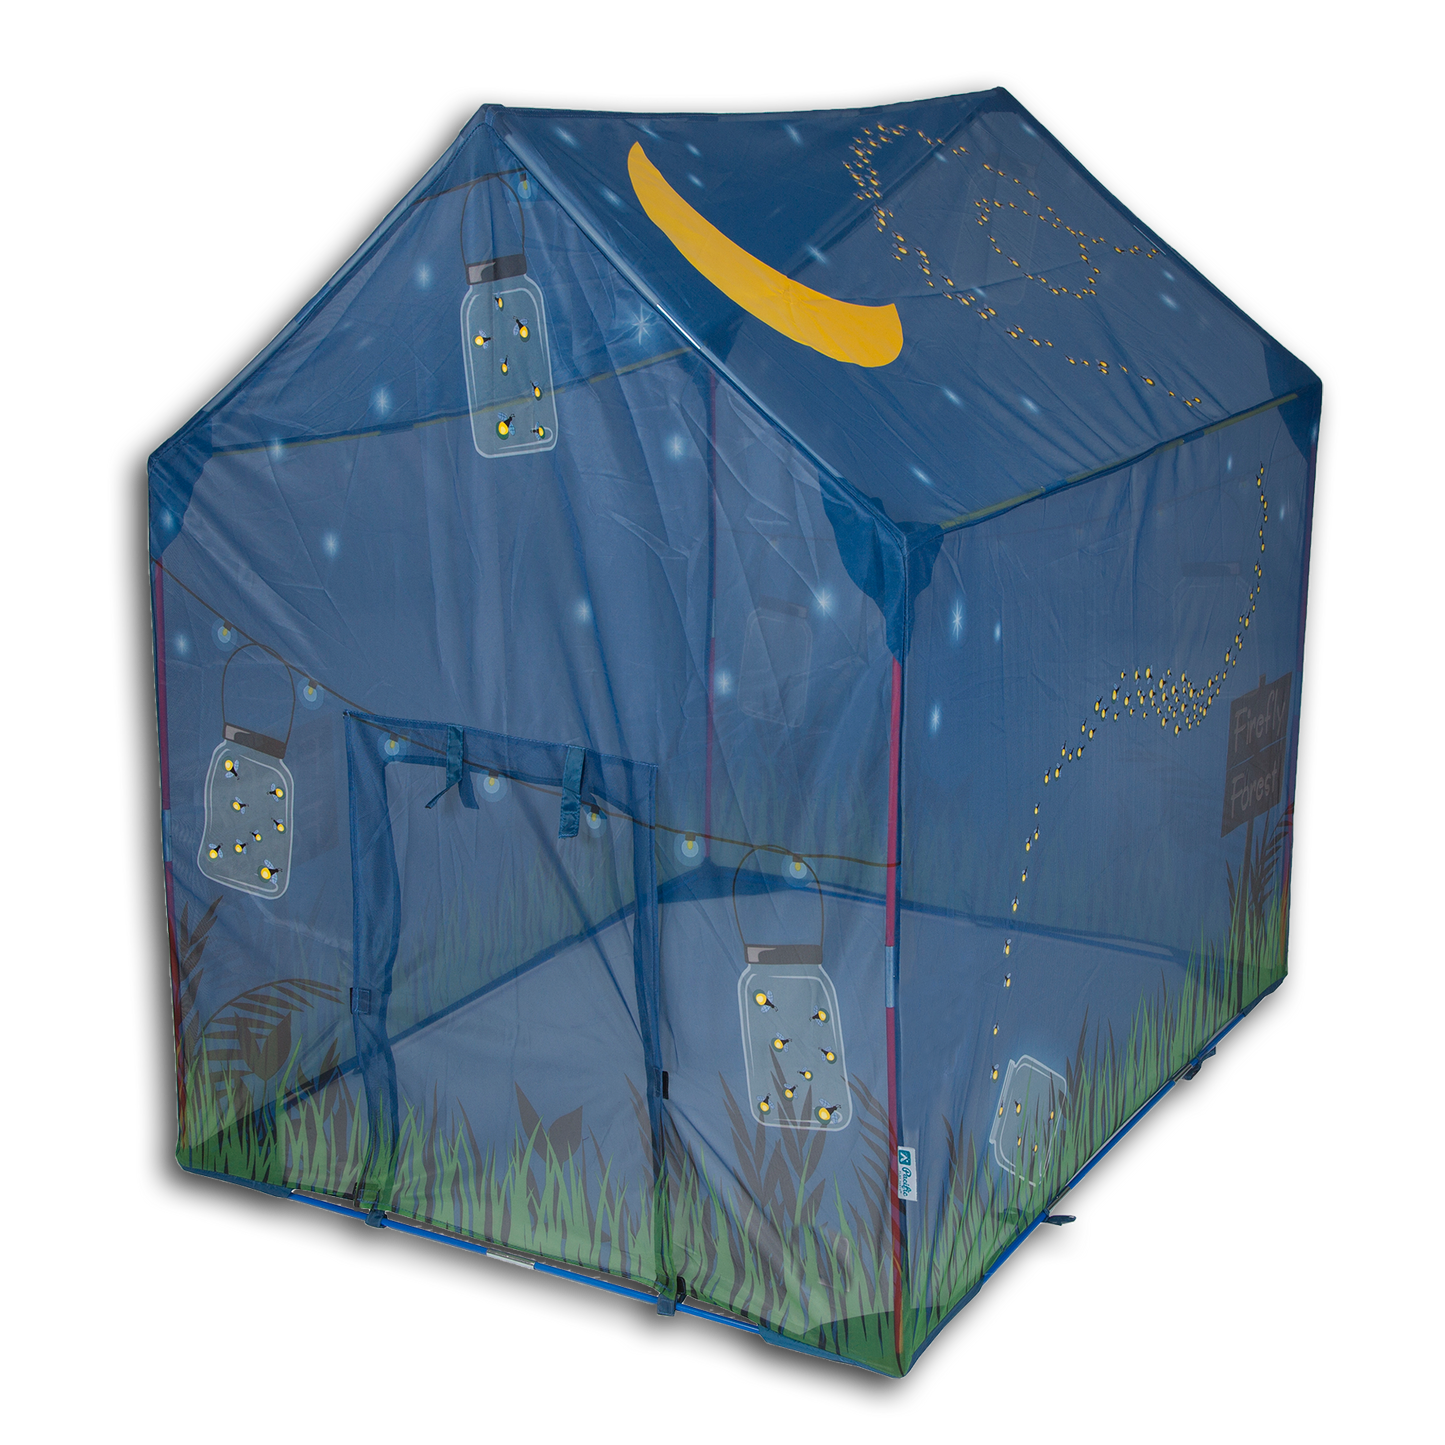 FIREFLY GLOW IN THE DARK PLAY TENT